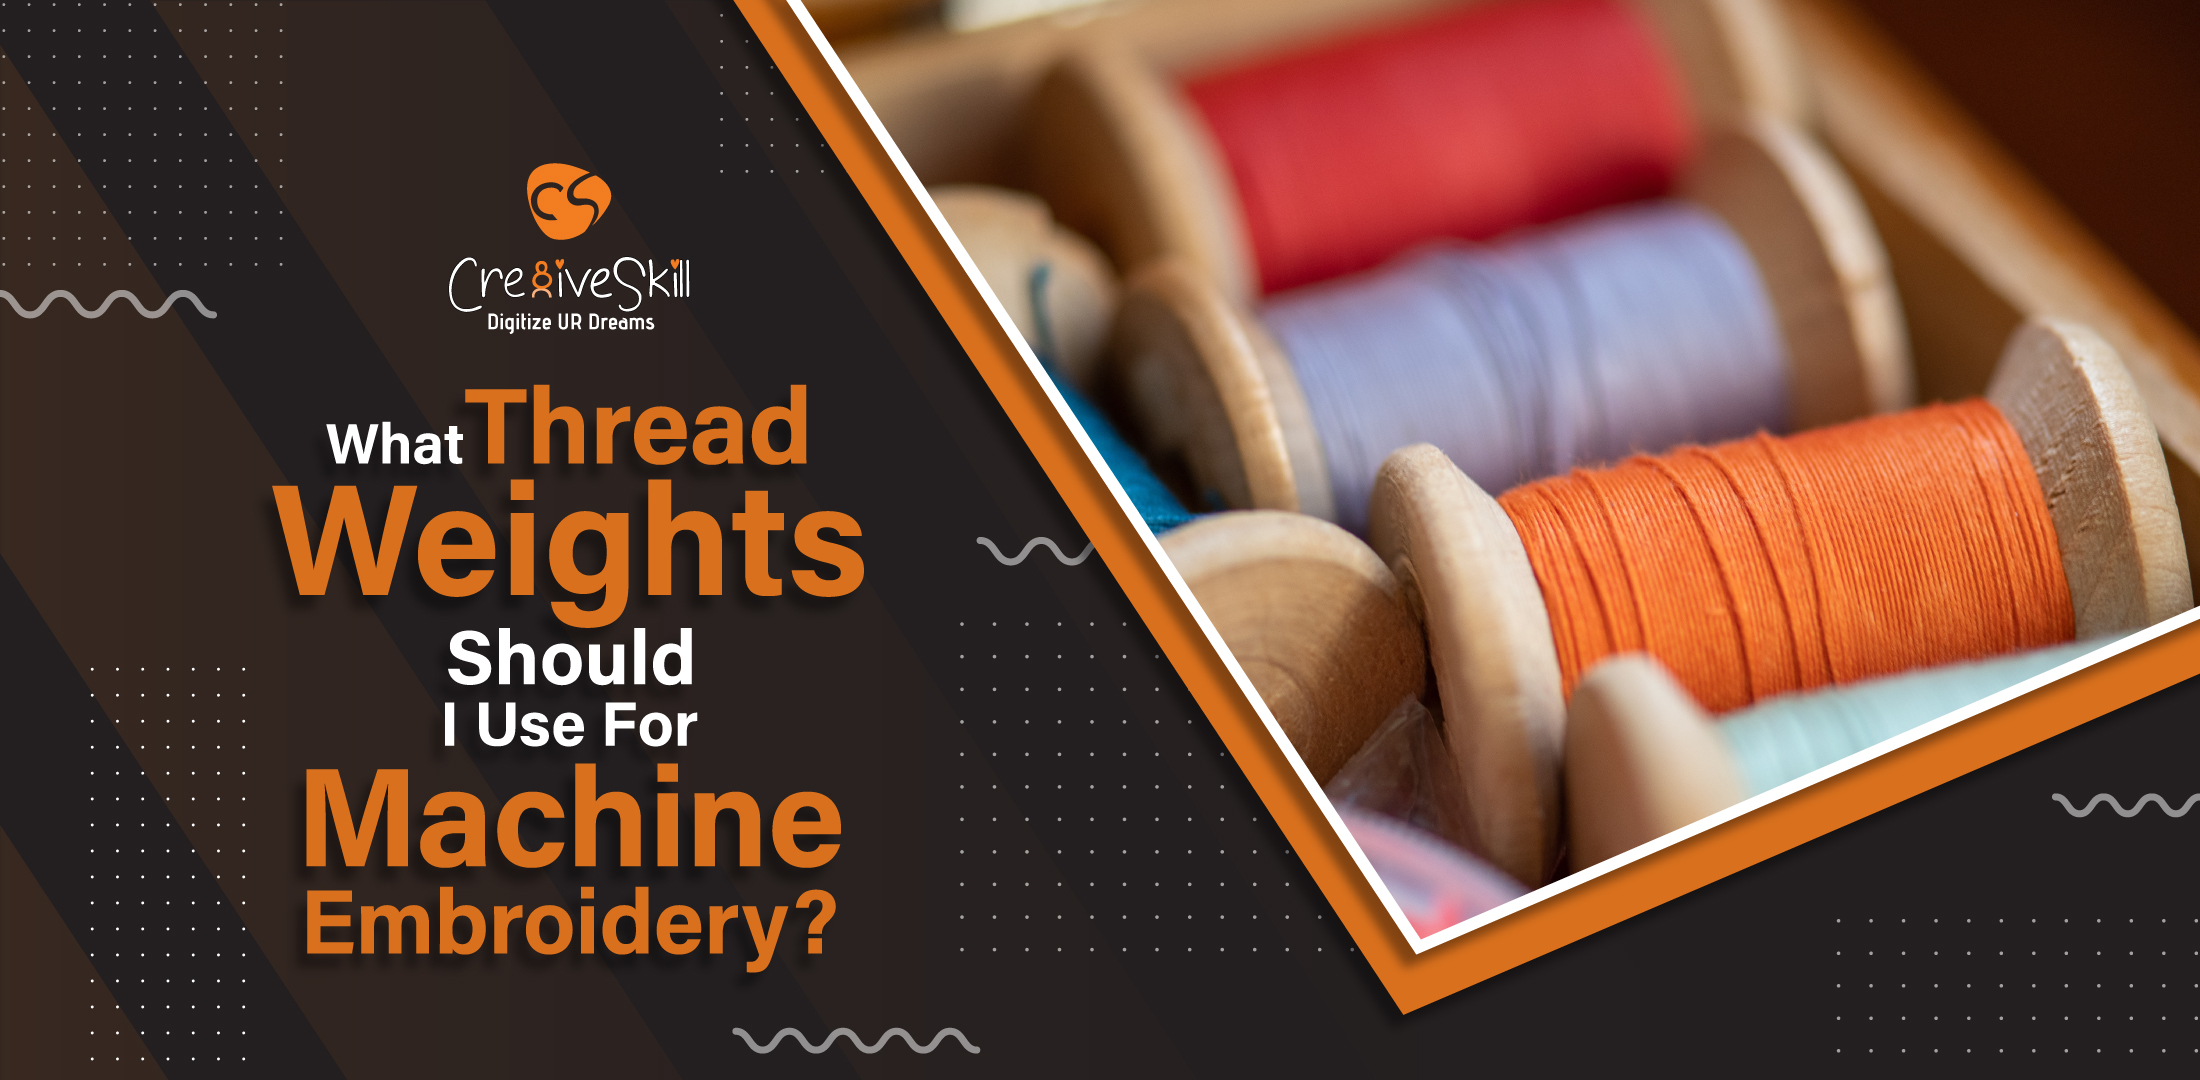 What Thread Weights Should I Use For Machine Embroidery - Cre8iveSkill